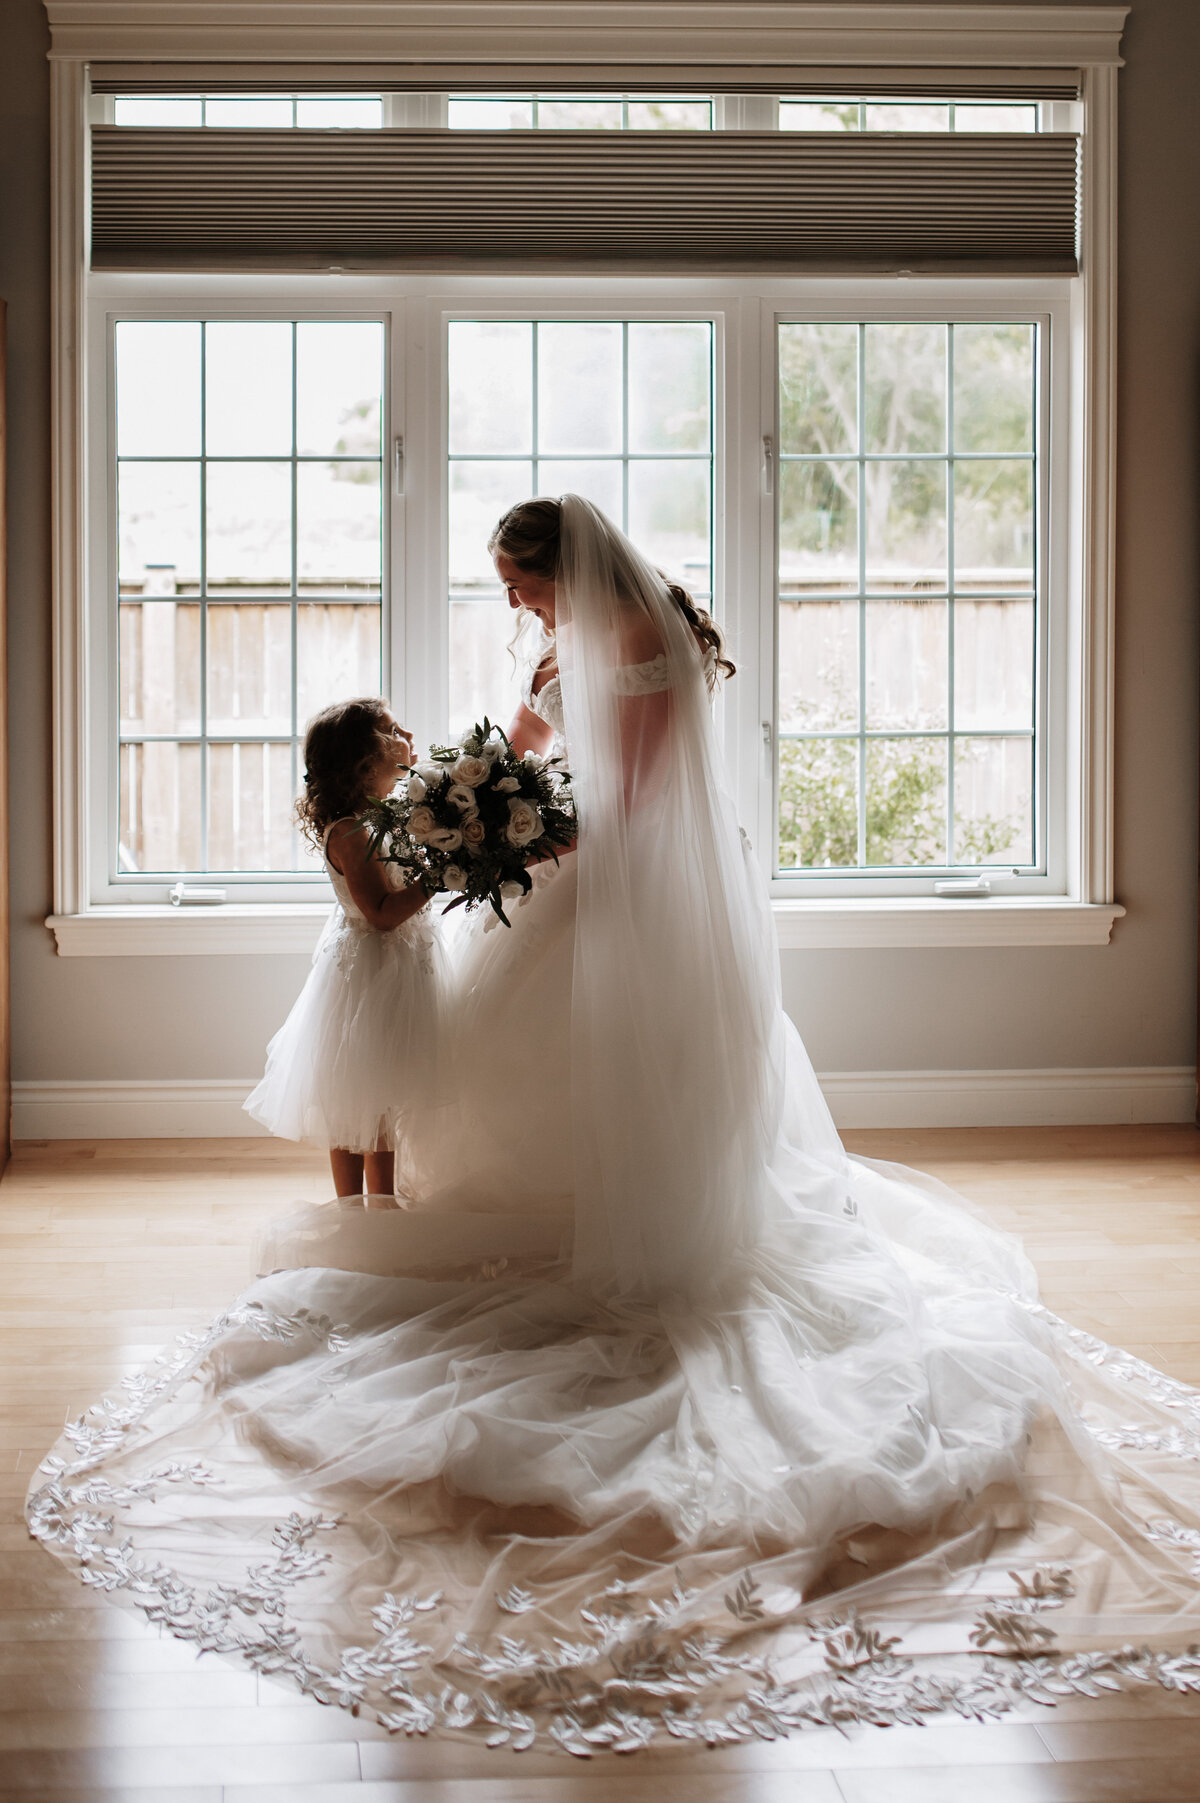 candid moment between bride and flower girl